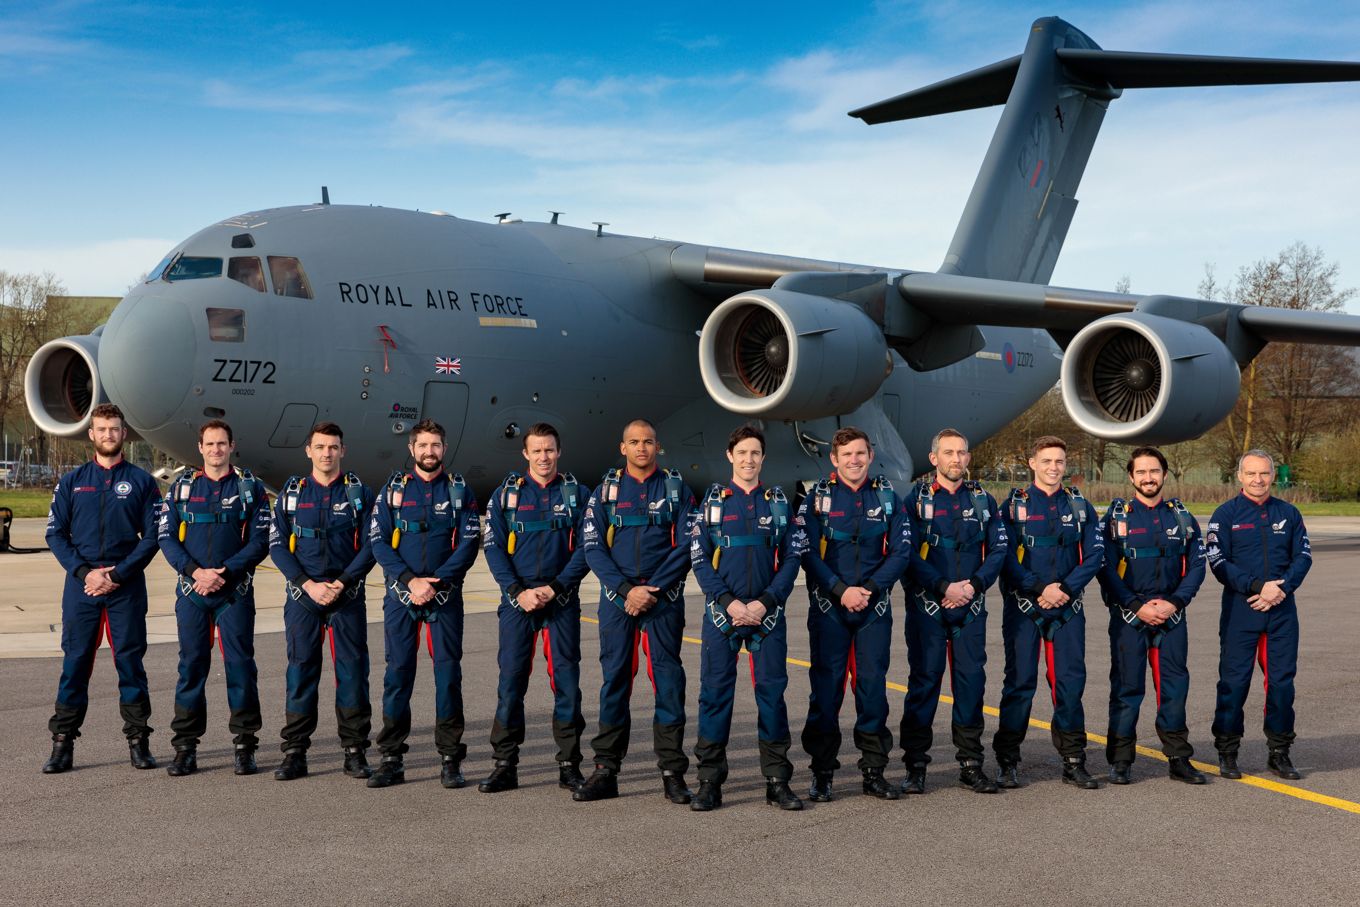 The 2021 RAF Falcons Parachute Display Team pictured at their home of RAF Brize Norton in front of a C-17 Globemaster